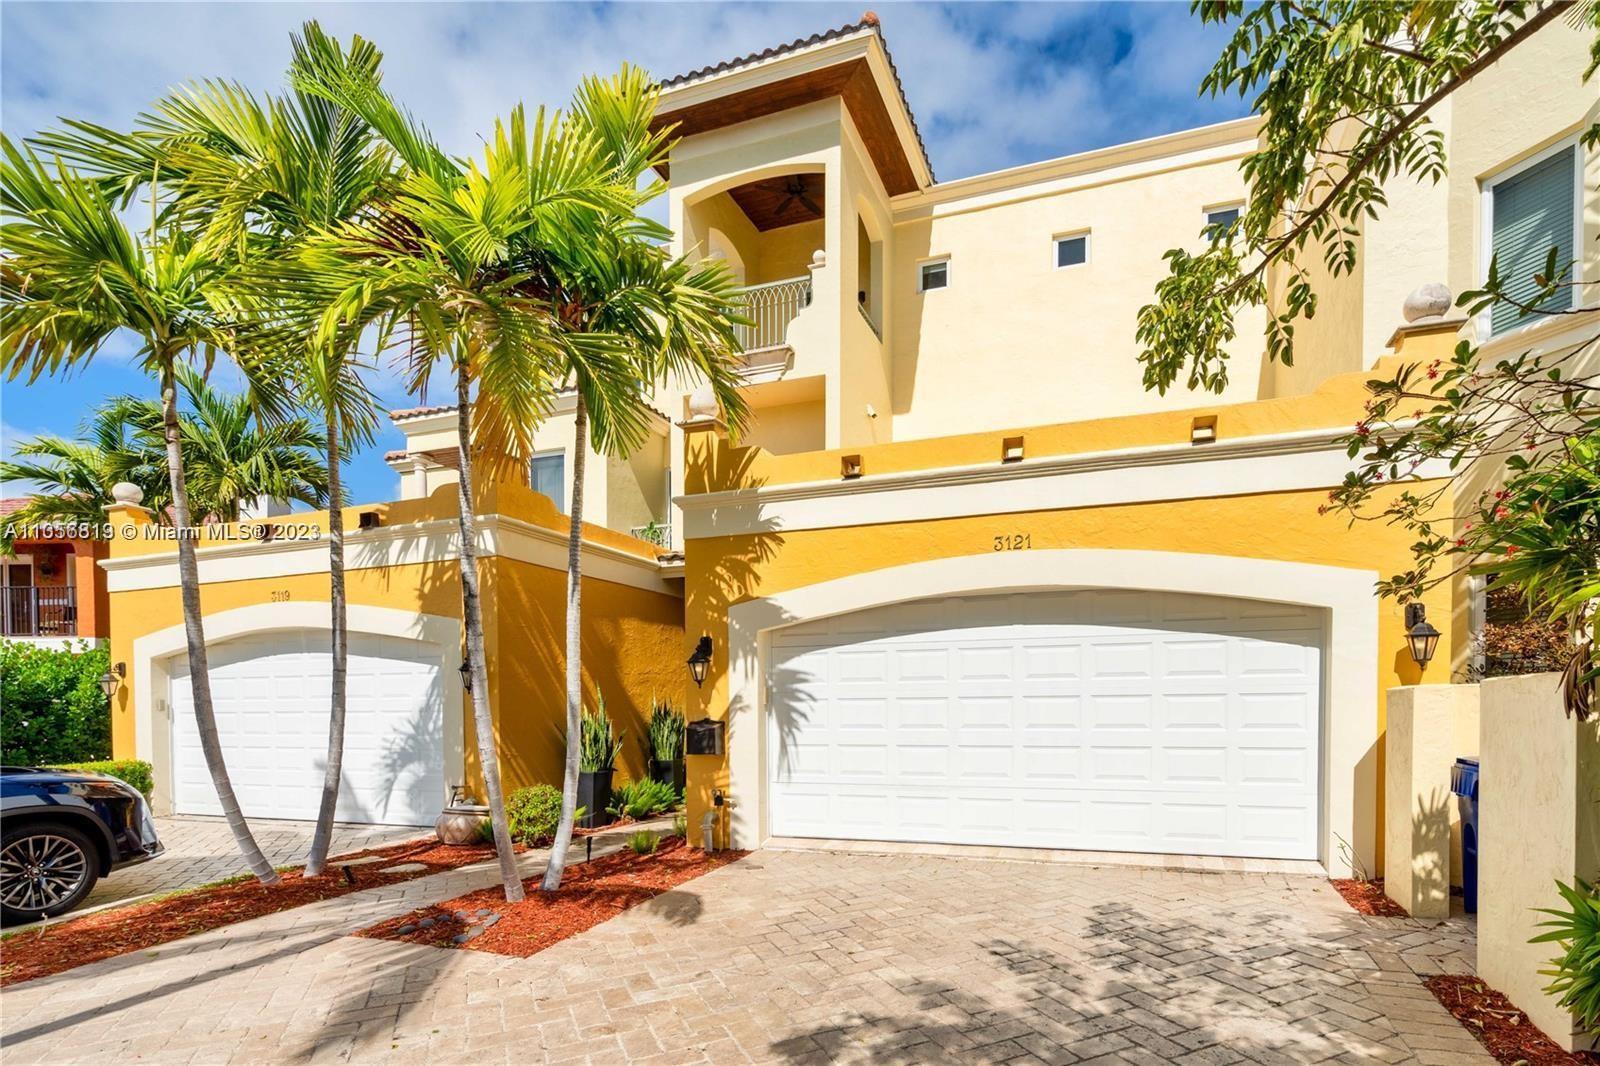 One of a kind townhome in prestigious Dolphin Isles in East Fort Lauderdale. This 3 bedroom, 4 bathroom townhouse has it all! Top of the line tile and hardwood flooring throughout , custom made Italian cabinetry, private elevator, safe room and much more. This townhouse sits right on the Intracoastal and has a dock for your boat. It has a gas fireplace and a range, 3 terraces, 2 master suites and 2 car garage that is climate controlled by Tesla charger, and the list goes on. Sitting right across from the beach, it does not get better than this! PROPERTY IS FOR RENT and SALE.